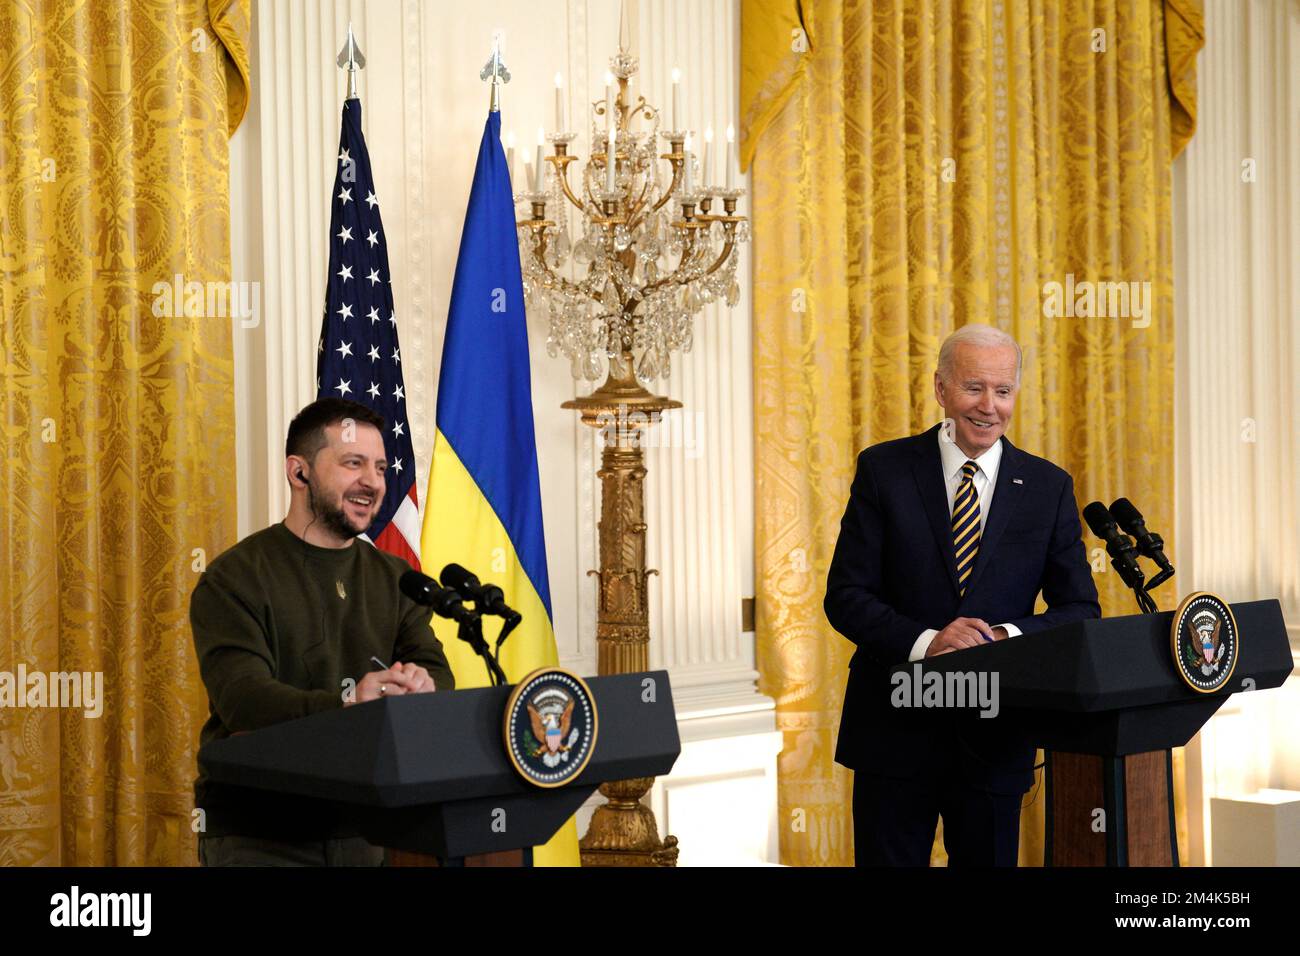 Washington, US, December 21, 2022. U.S. President Joe Biden and Ukrainian President Volodymyr Zelenskyy hold a joint news conference after their meeting at the White House in Washington on December 21, 2022. Photo by Yuri Gripas/ABACAPRESS.COM Stock Photo